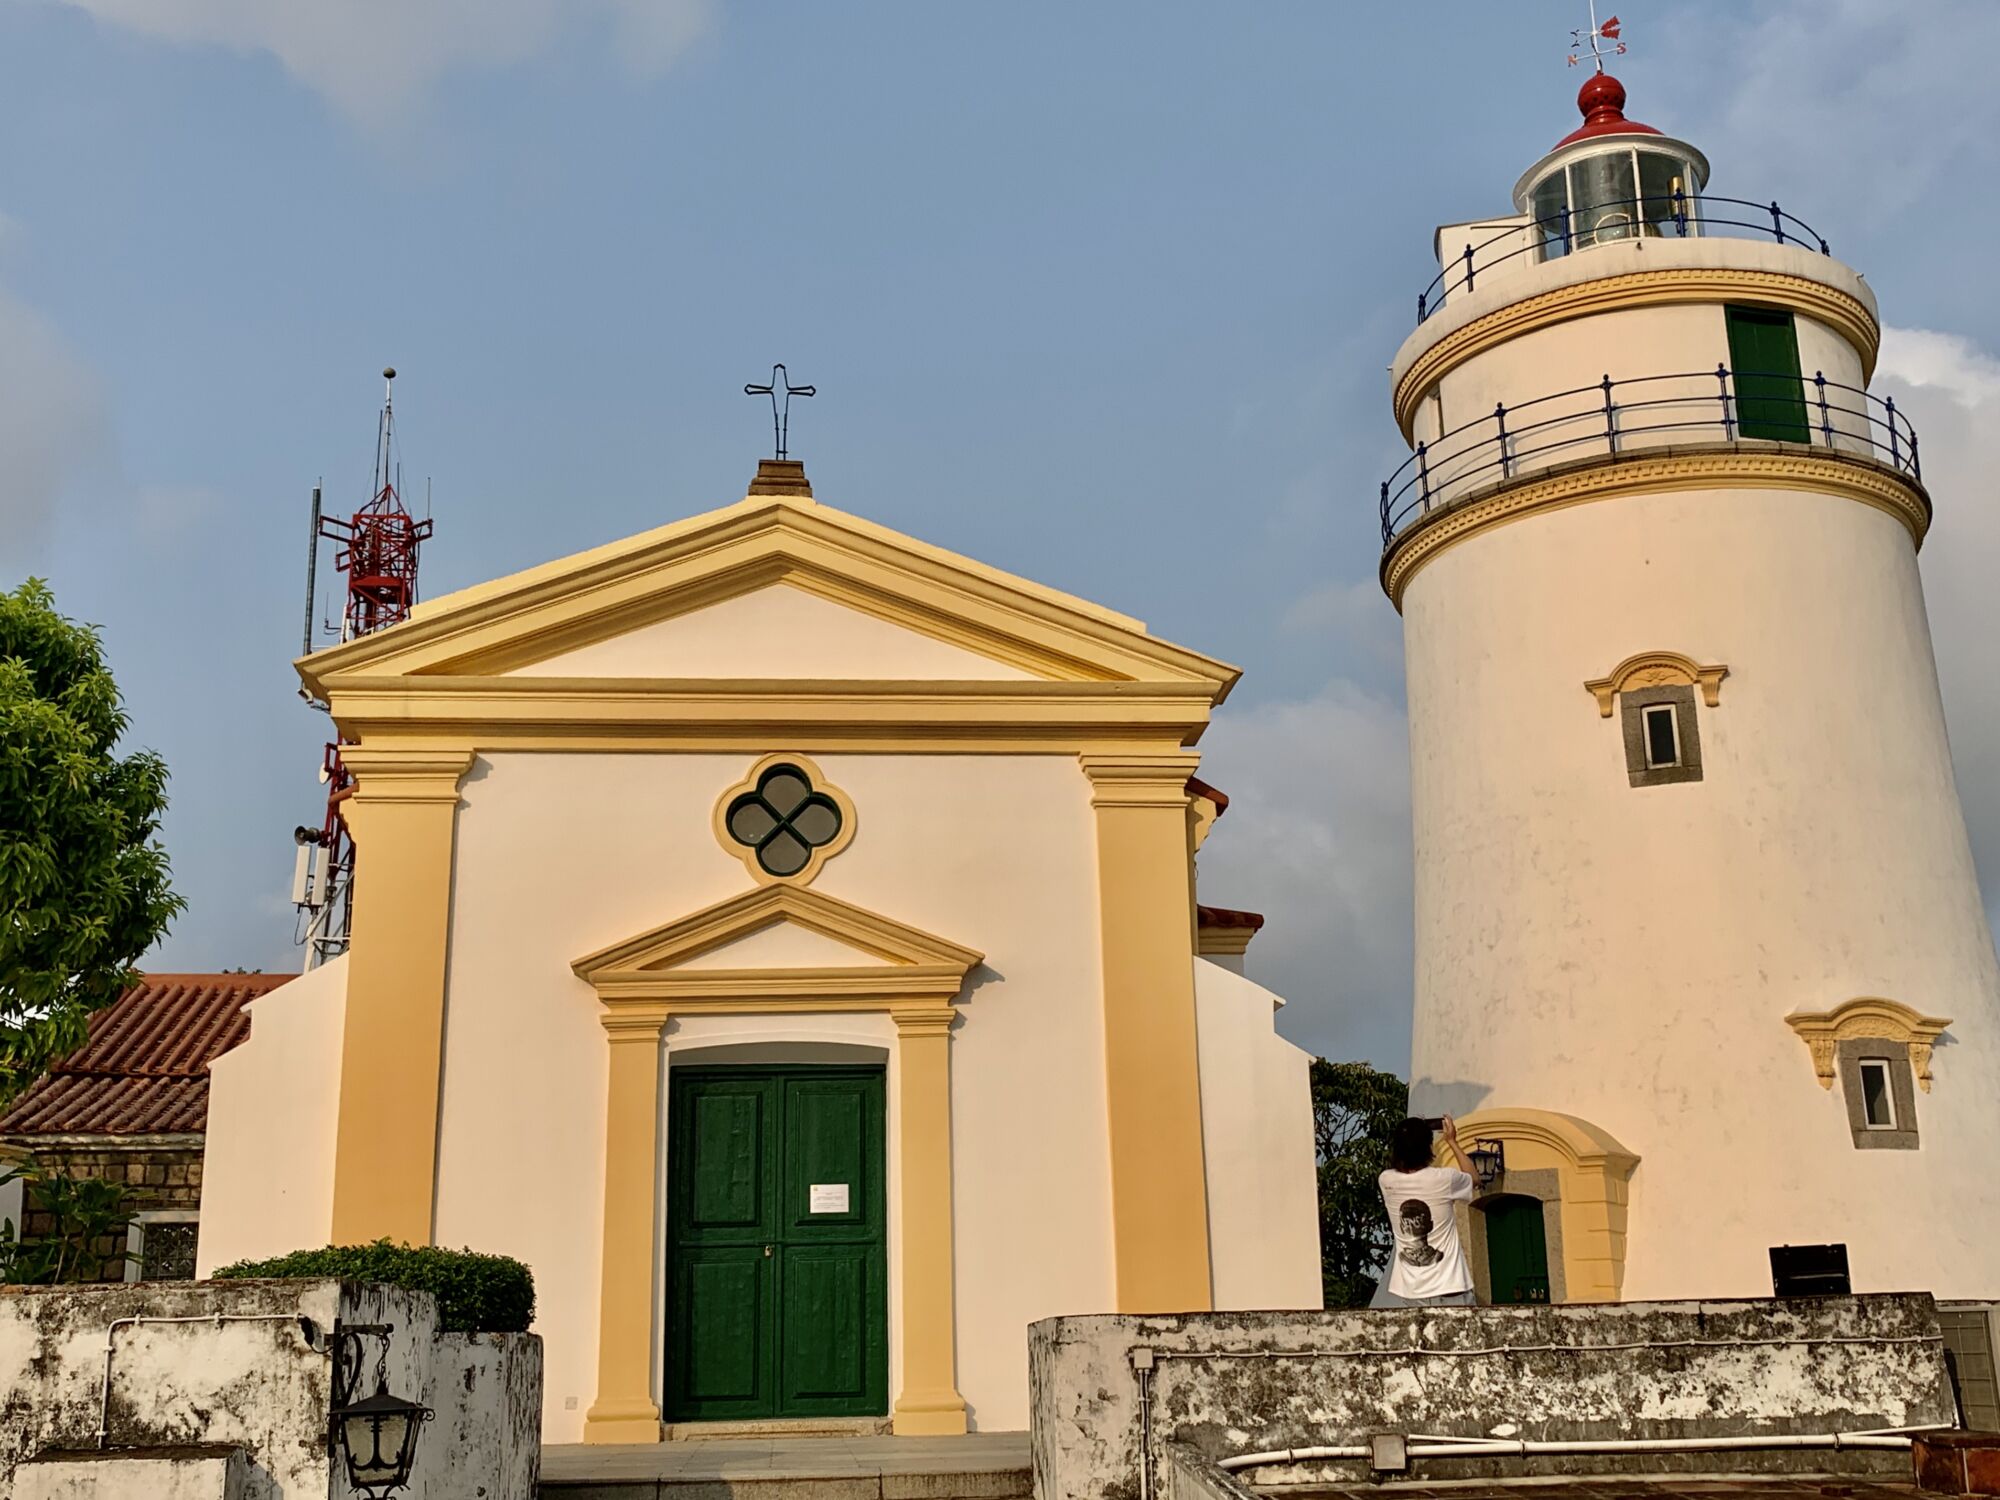 Guia Church and Lighthouse Front Macau Lifestyle